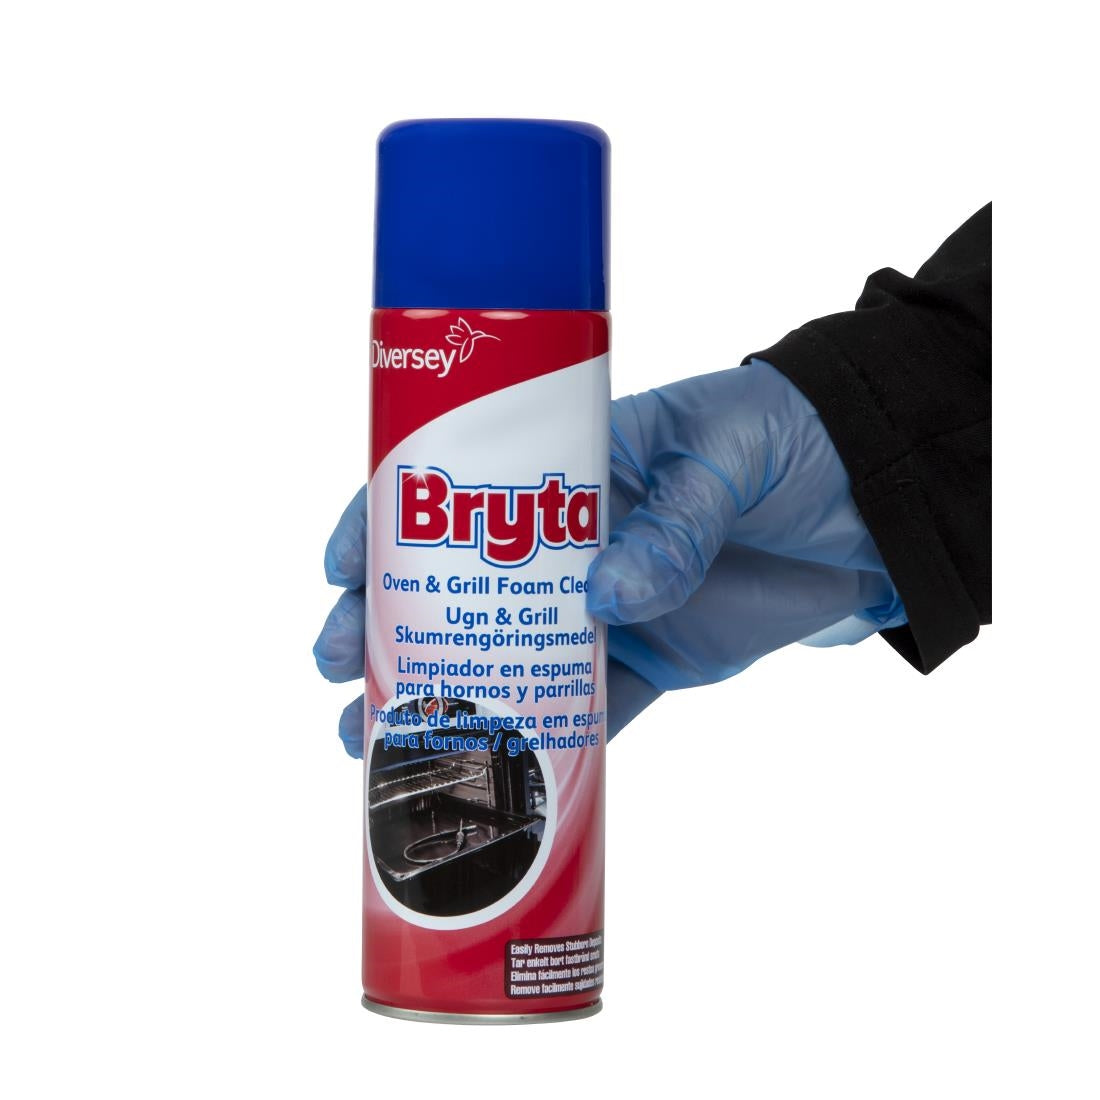 Bryta Foam Grill and Oven Cleaner Ready To Use 500ml JD Catering Equipment Solutions Ltd